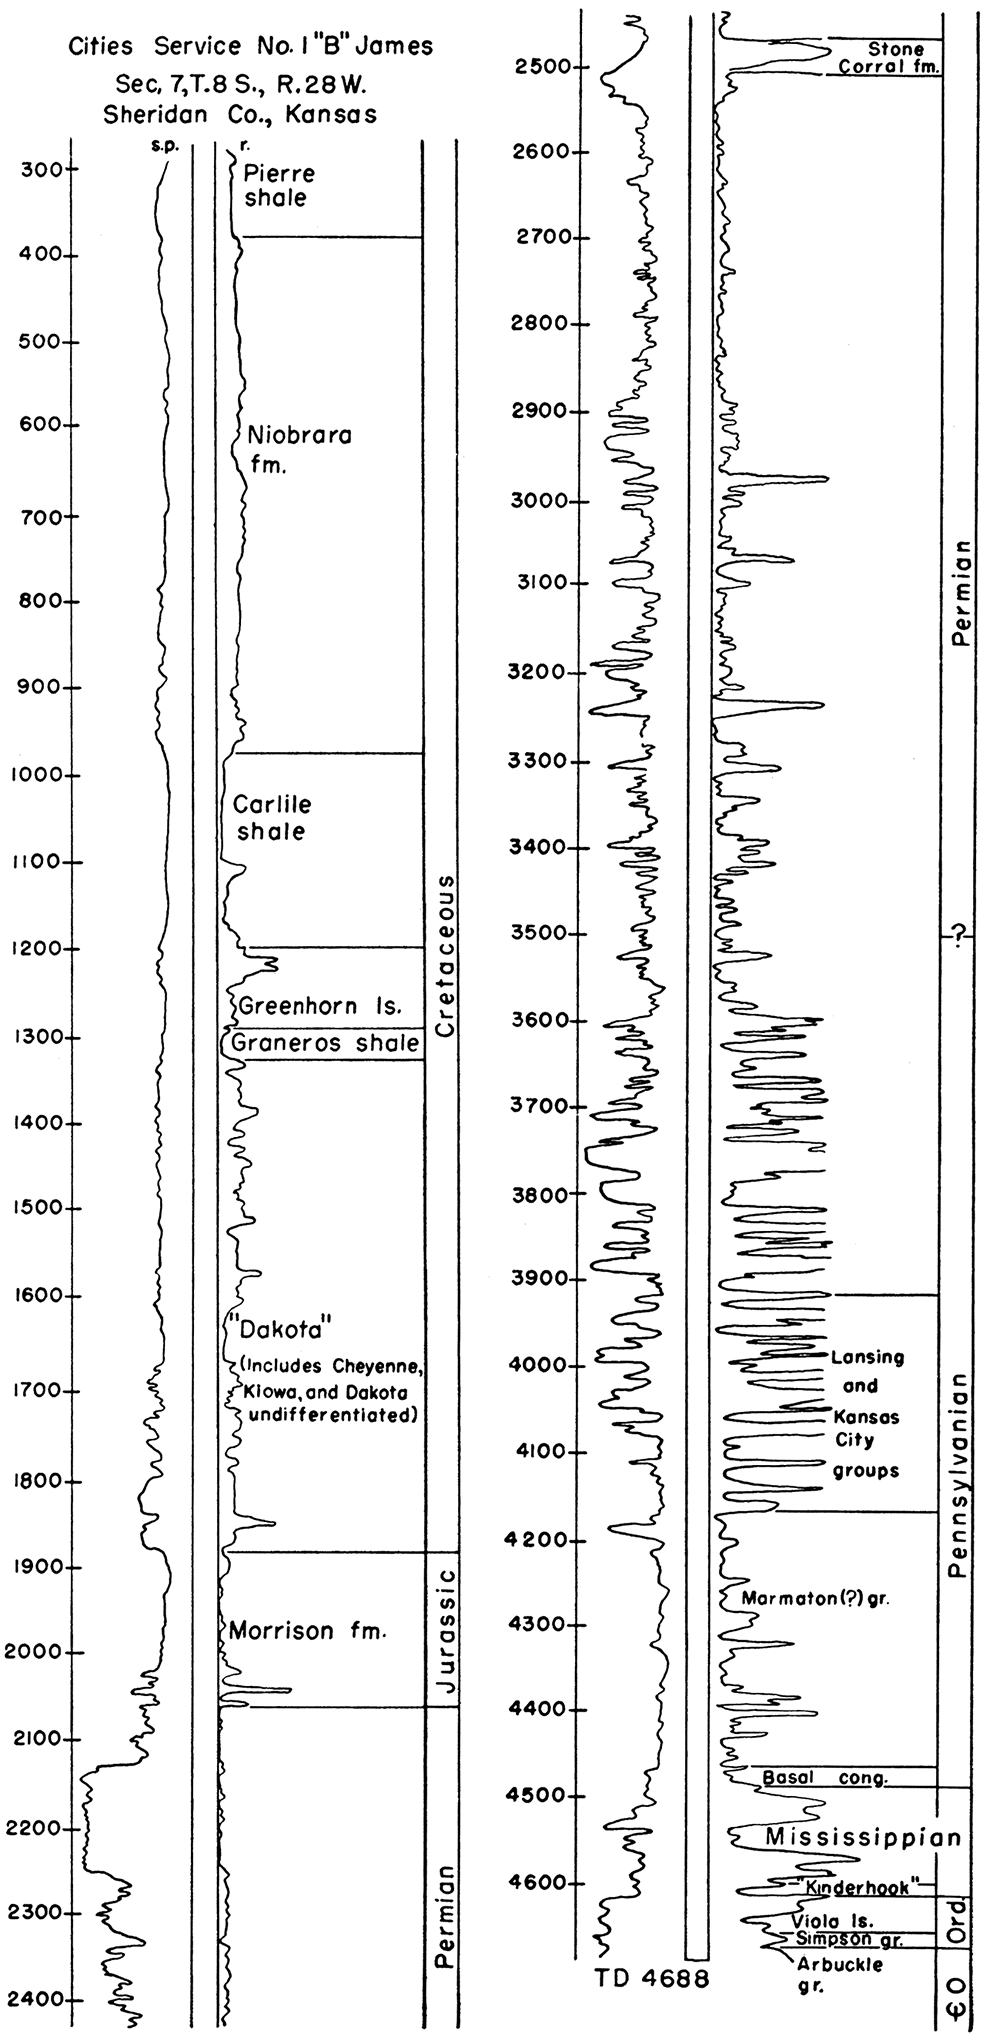 Electric log showing relative stratigraphic position of rock units mentioned in this report.